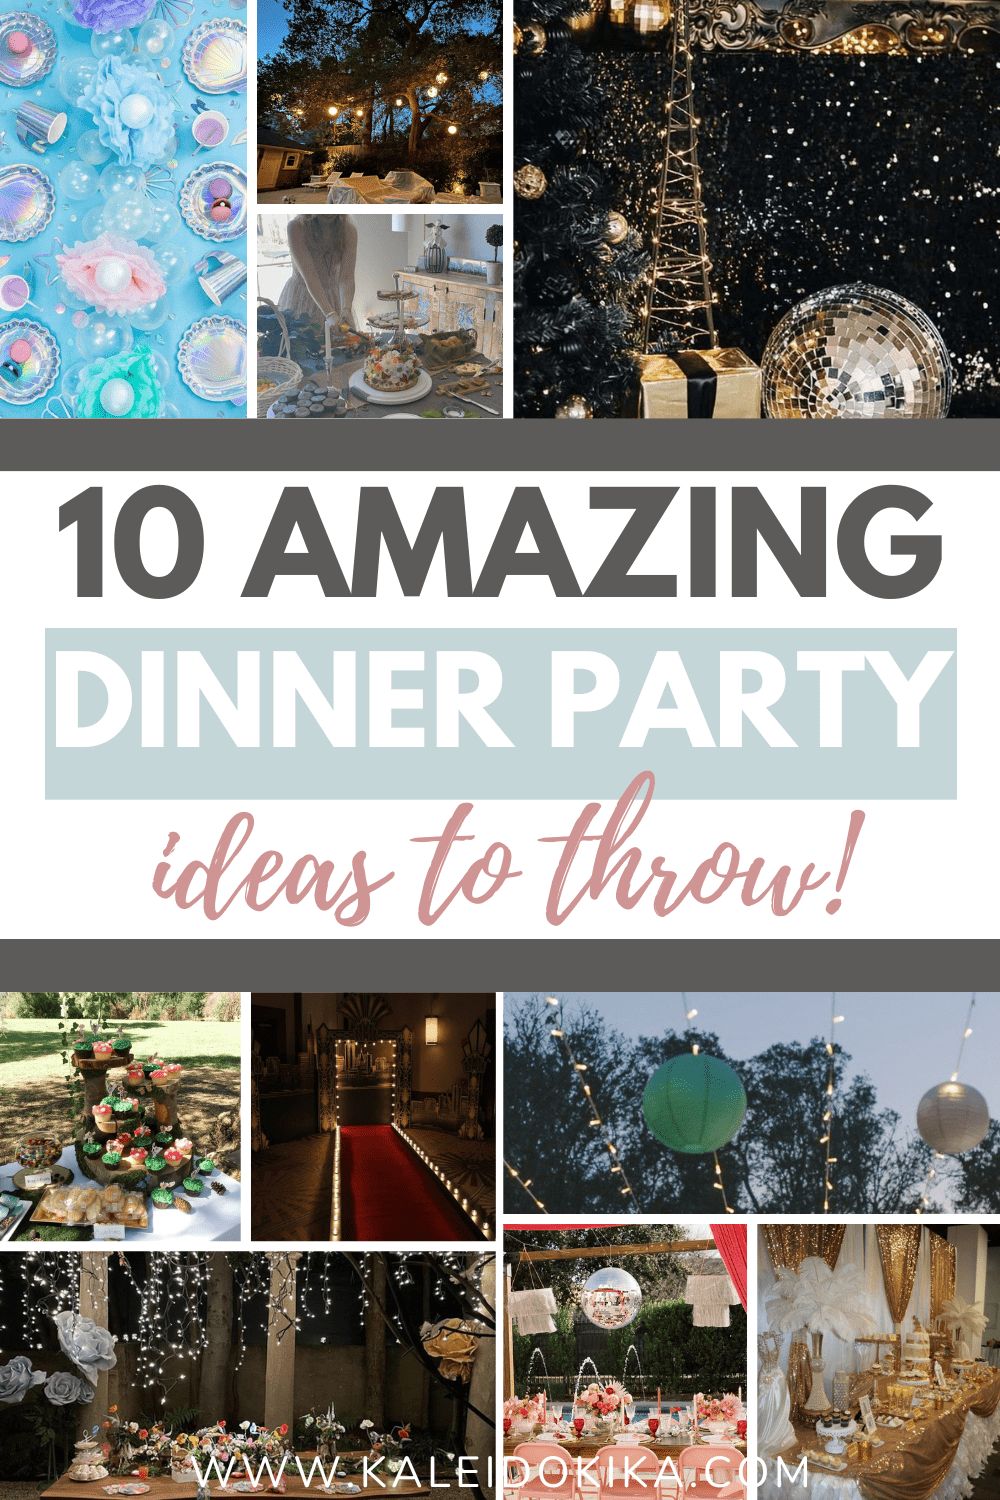 10 Amazing Dinner Party Ideas to throw